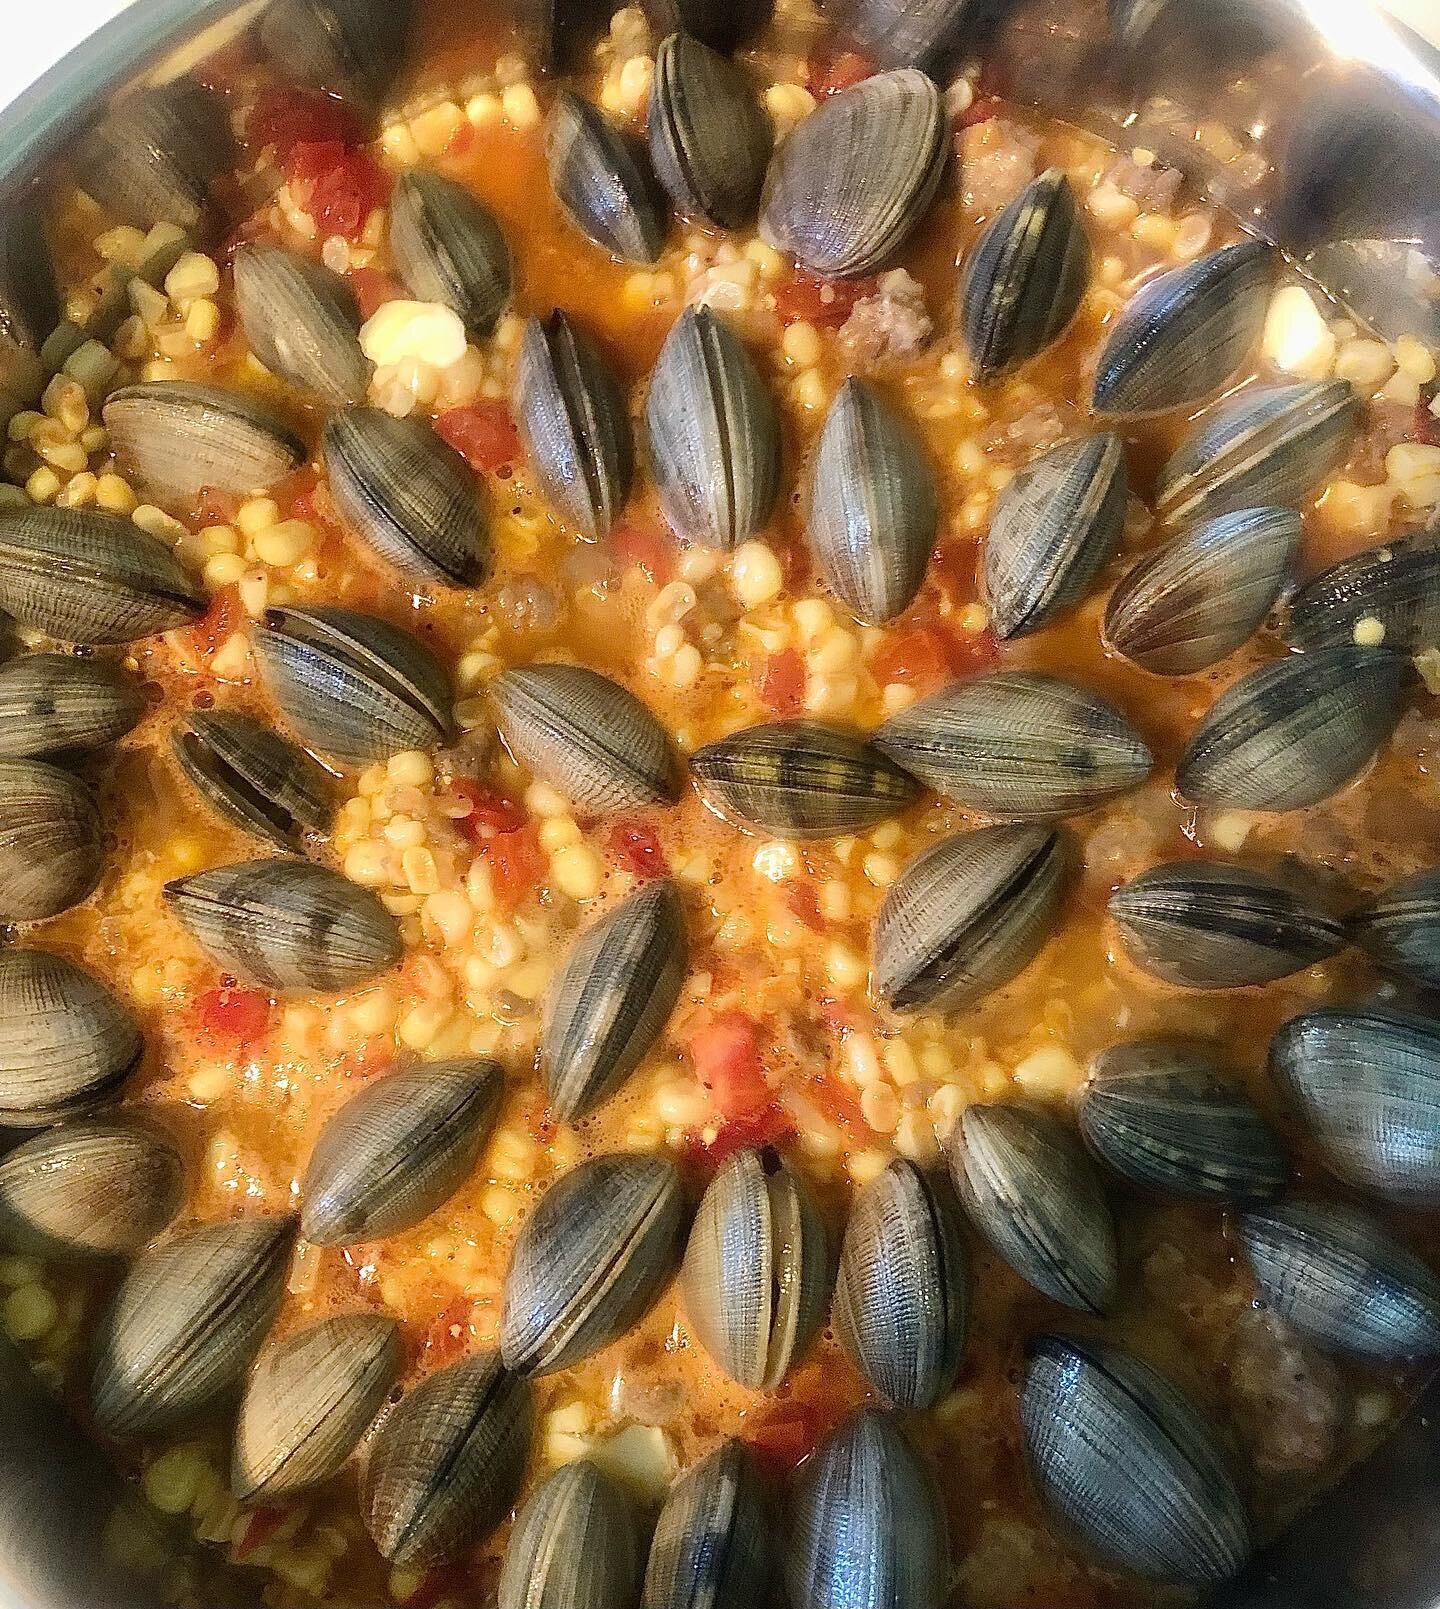 Unusual and delicious clam recipe from @inagarten - Summer Skillet with Clams, Sausage &amp; Corn #whatsforlunch #endofsummer